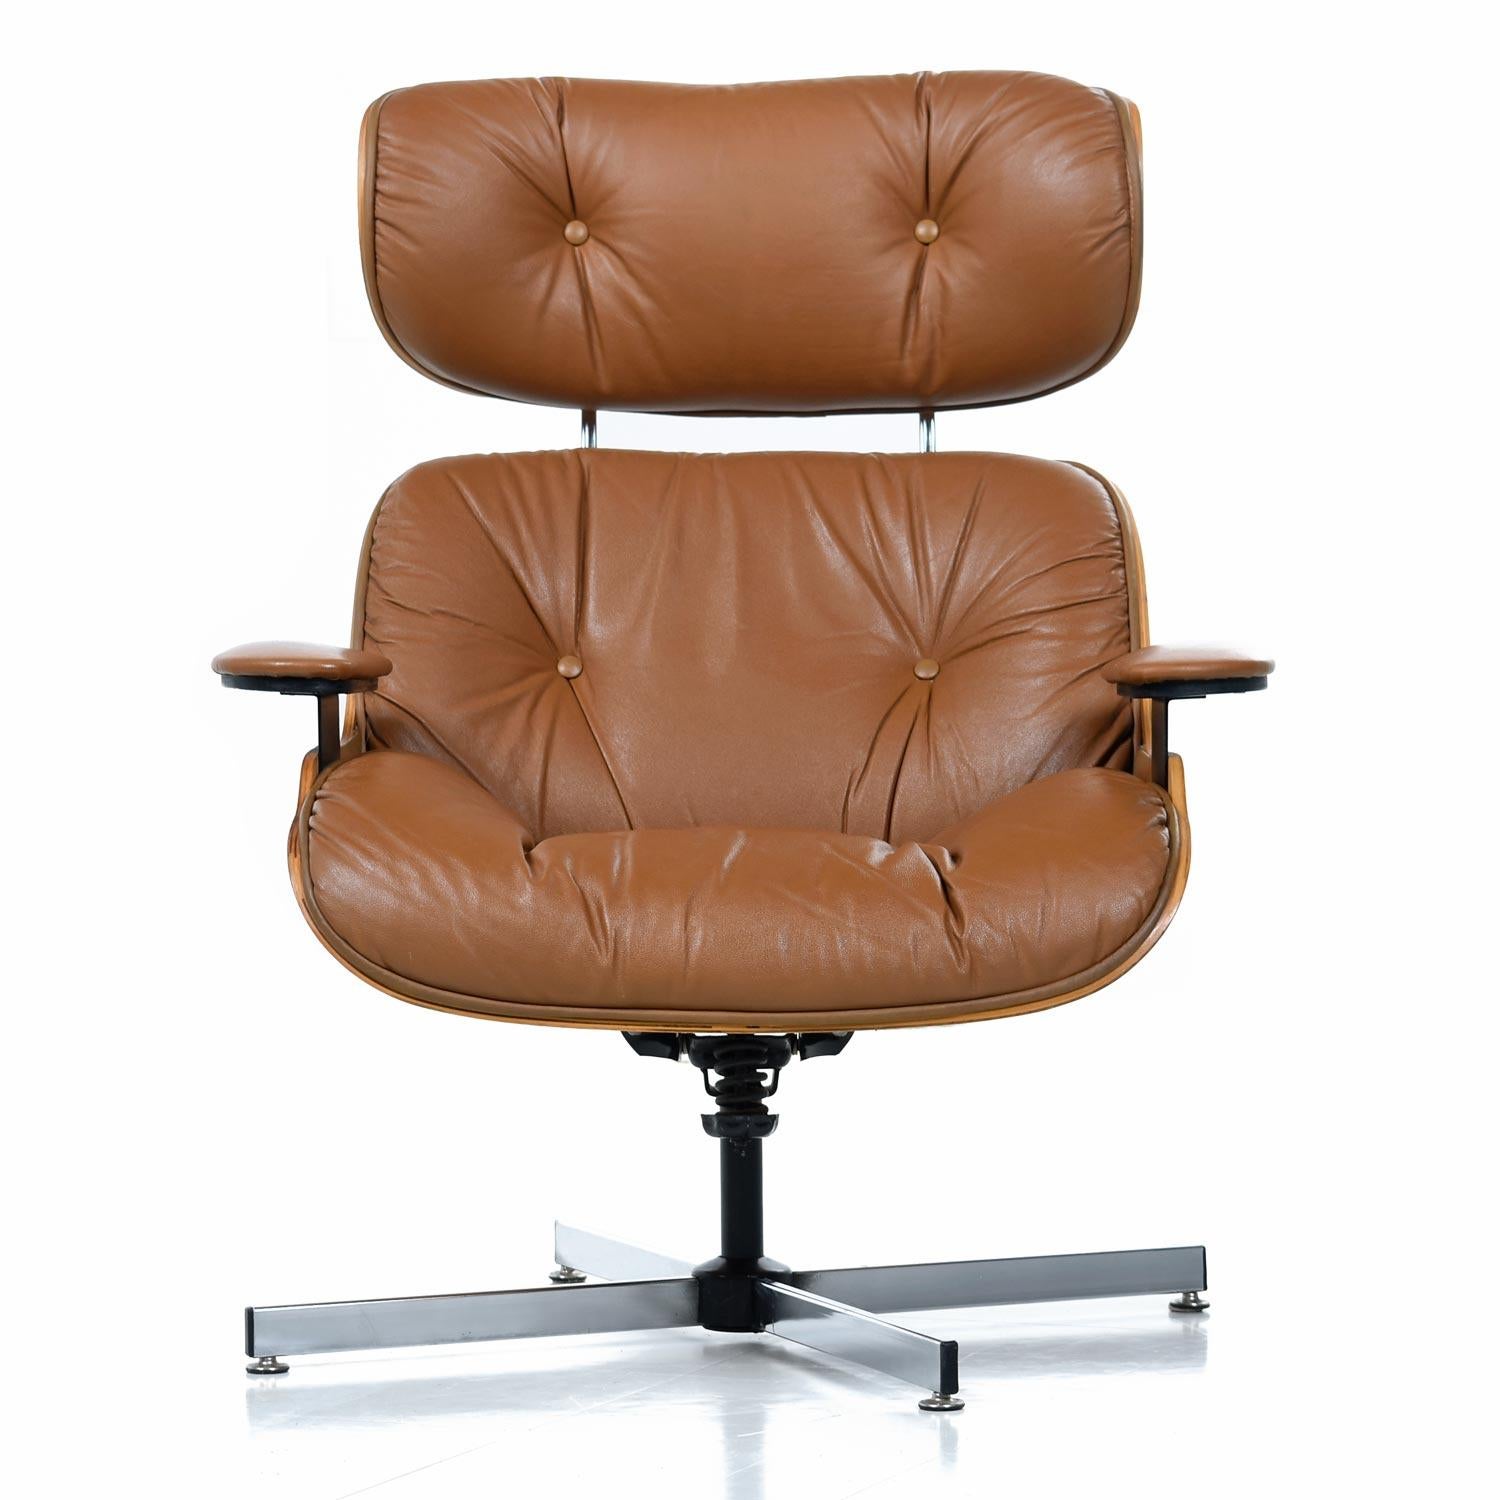 American Mid-Century Modern Eames Style Lounge Chair and Ottoman